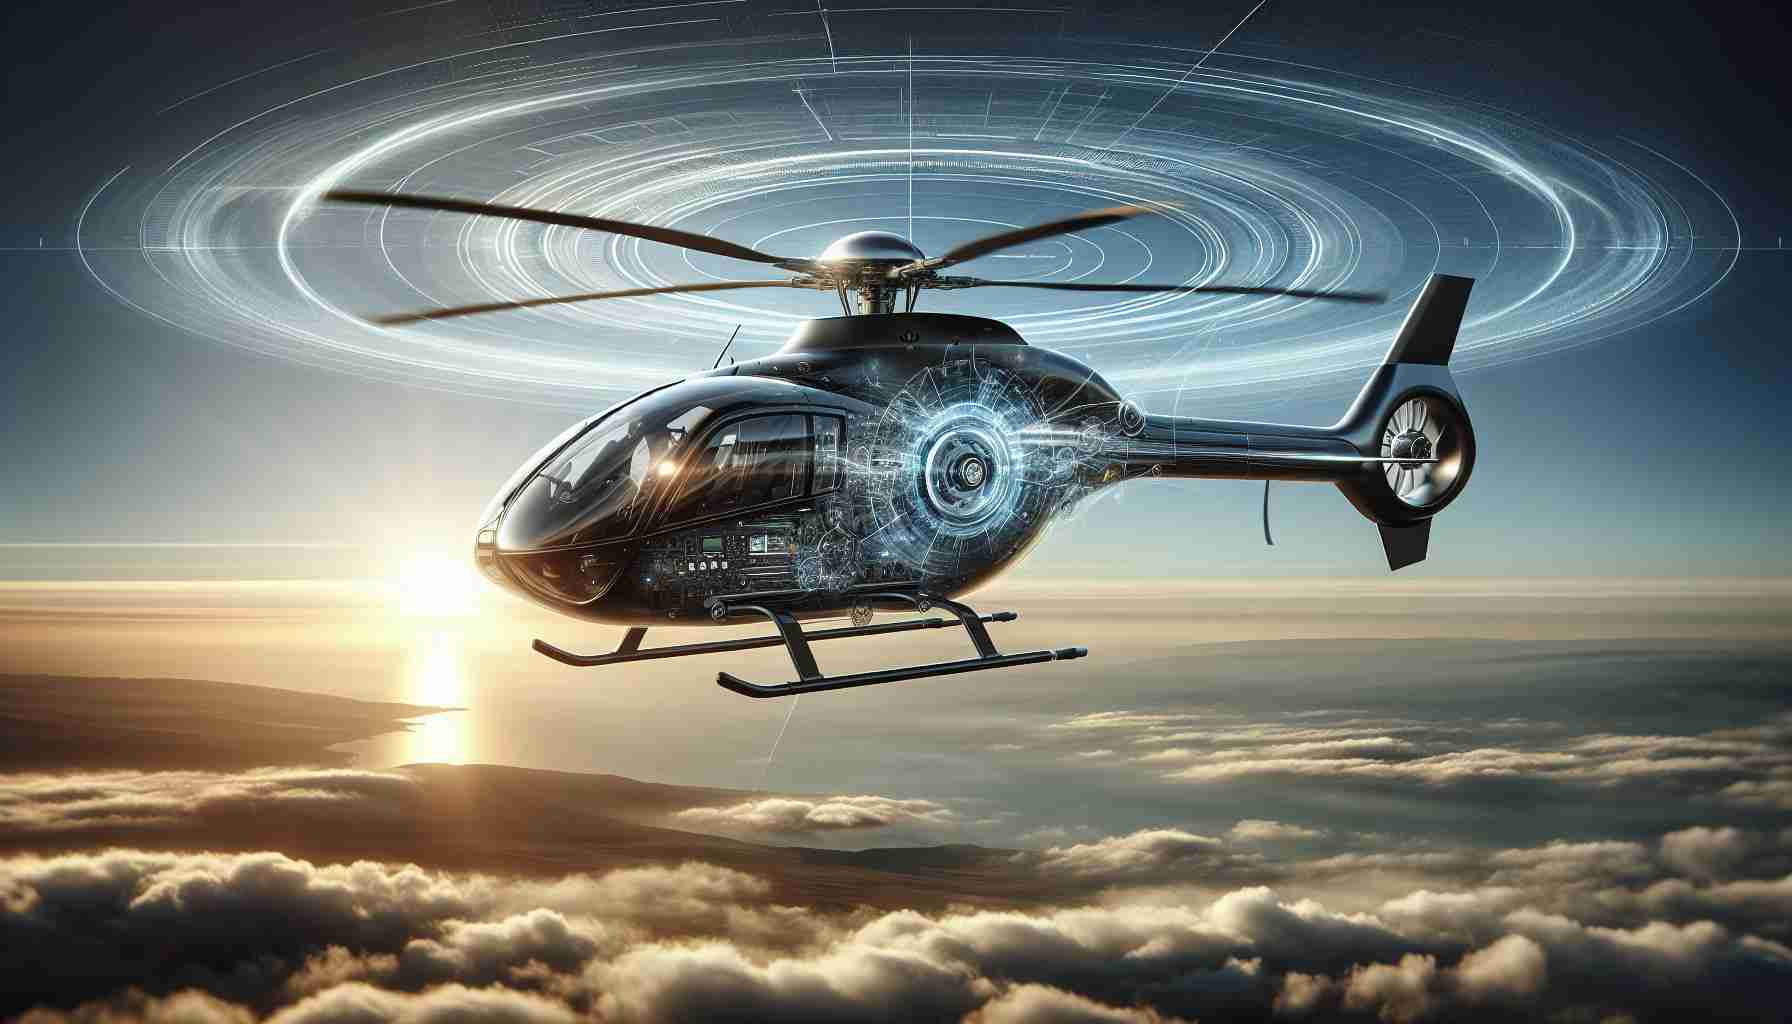 Generate a high-definition, realistic image of a revolutionary new helicopter design that represents a significant advancement in air travel. The helicopter should feature cutting-edge technologies, showcasing an aerodynamic structure, innovative propeller mechanism and futuristic control system. The background can display a clear sky indicating it in-flight.